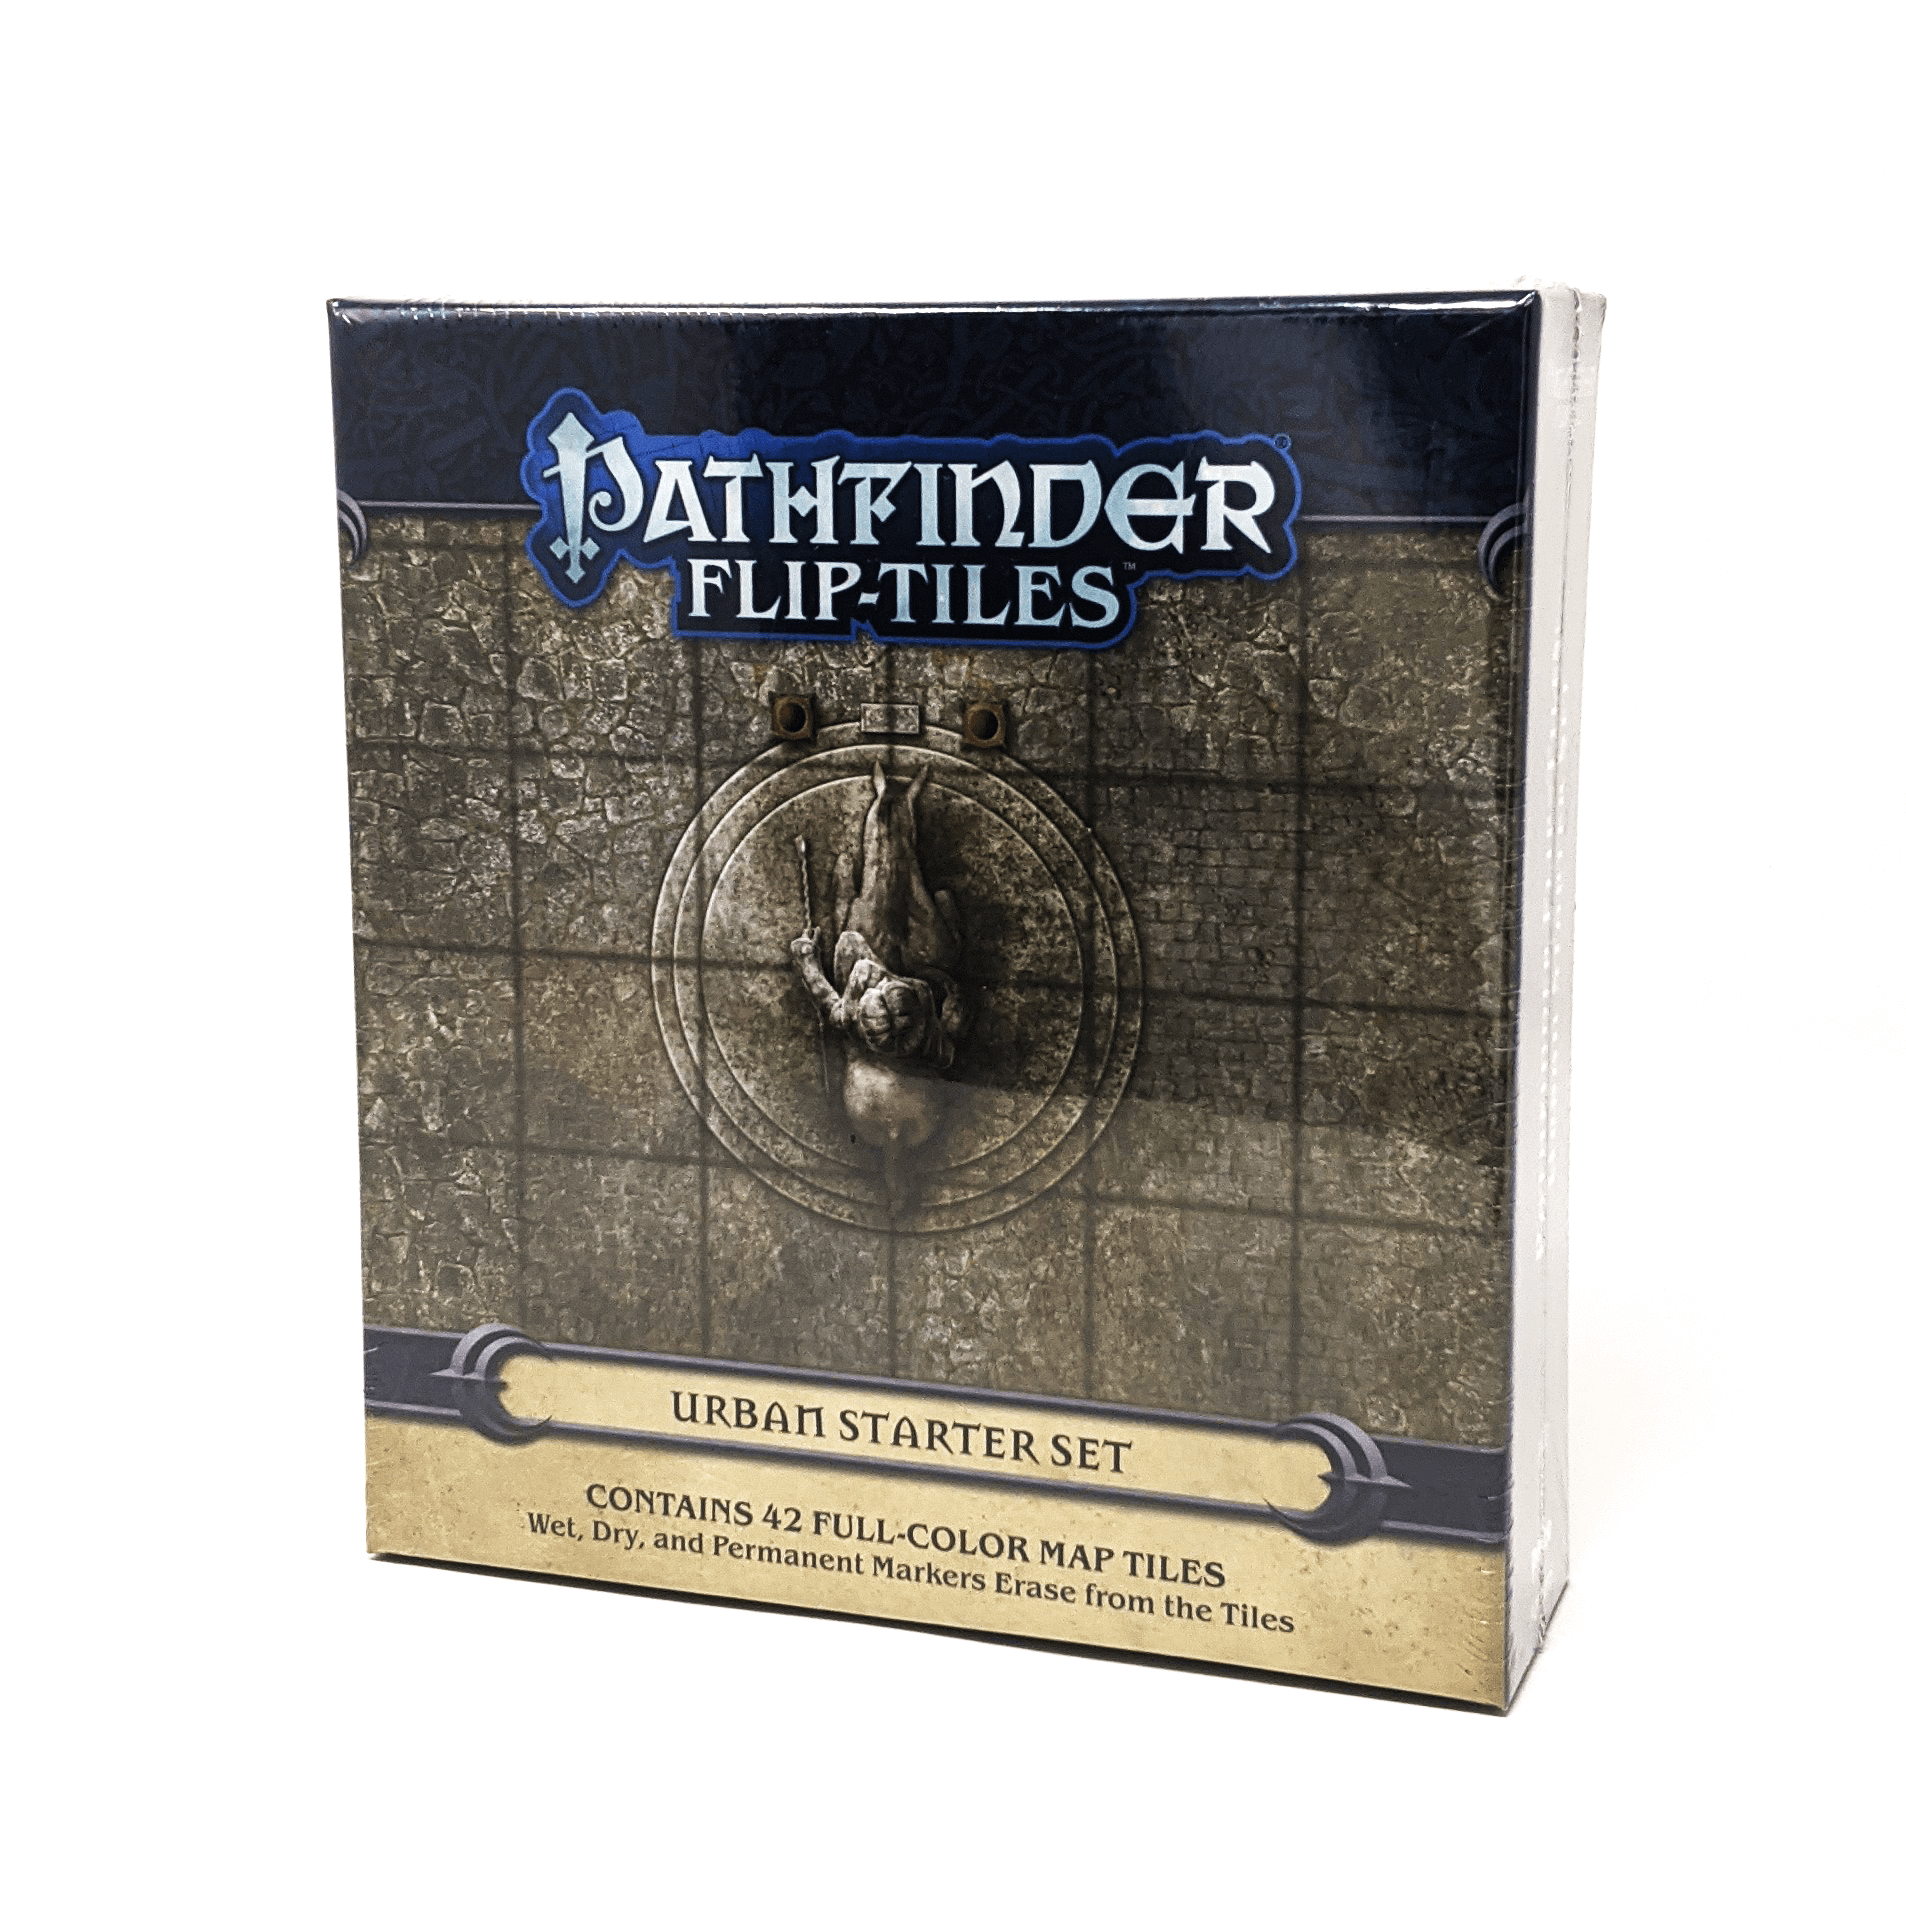 Pathfinder Flip Tiles Urban StarterSet box front: a top-down stone statue of a person on a horse in the middle of a plaza. There is a square grid over the plaza